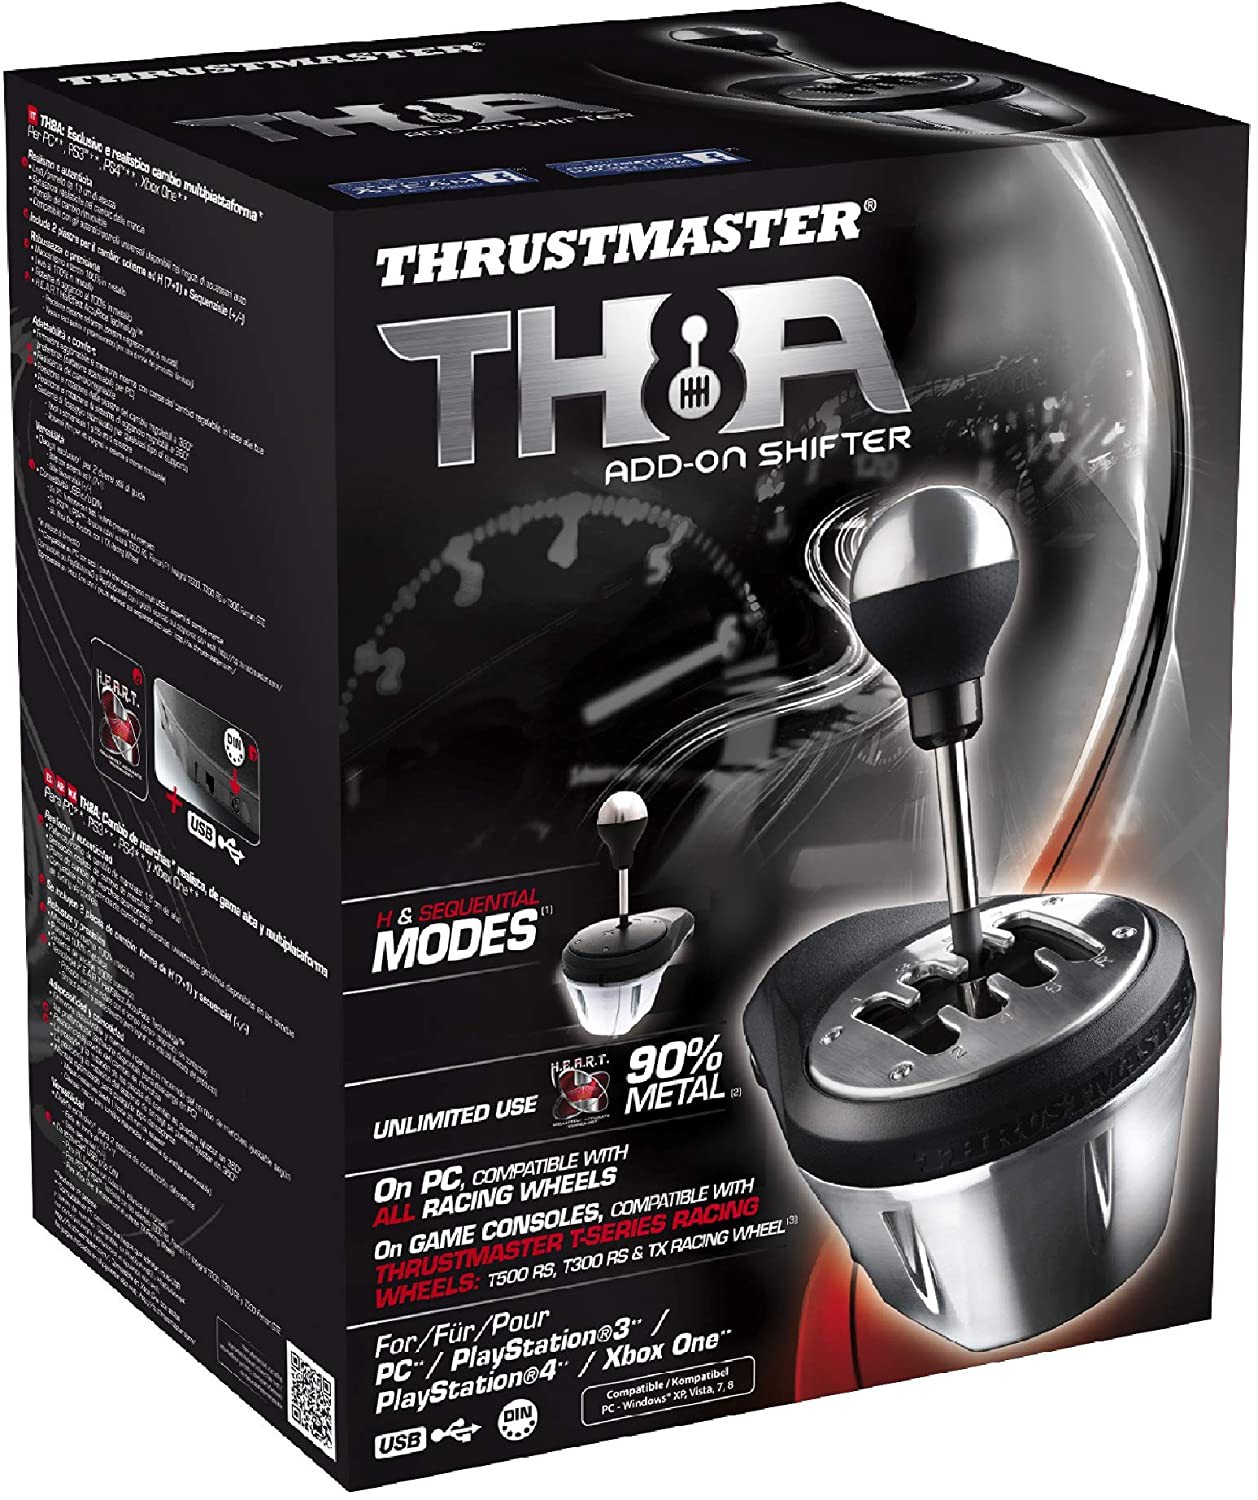 Thrustmaster TH8A Add-On Shifter (XB1 / PS4 / PS3 / PC)